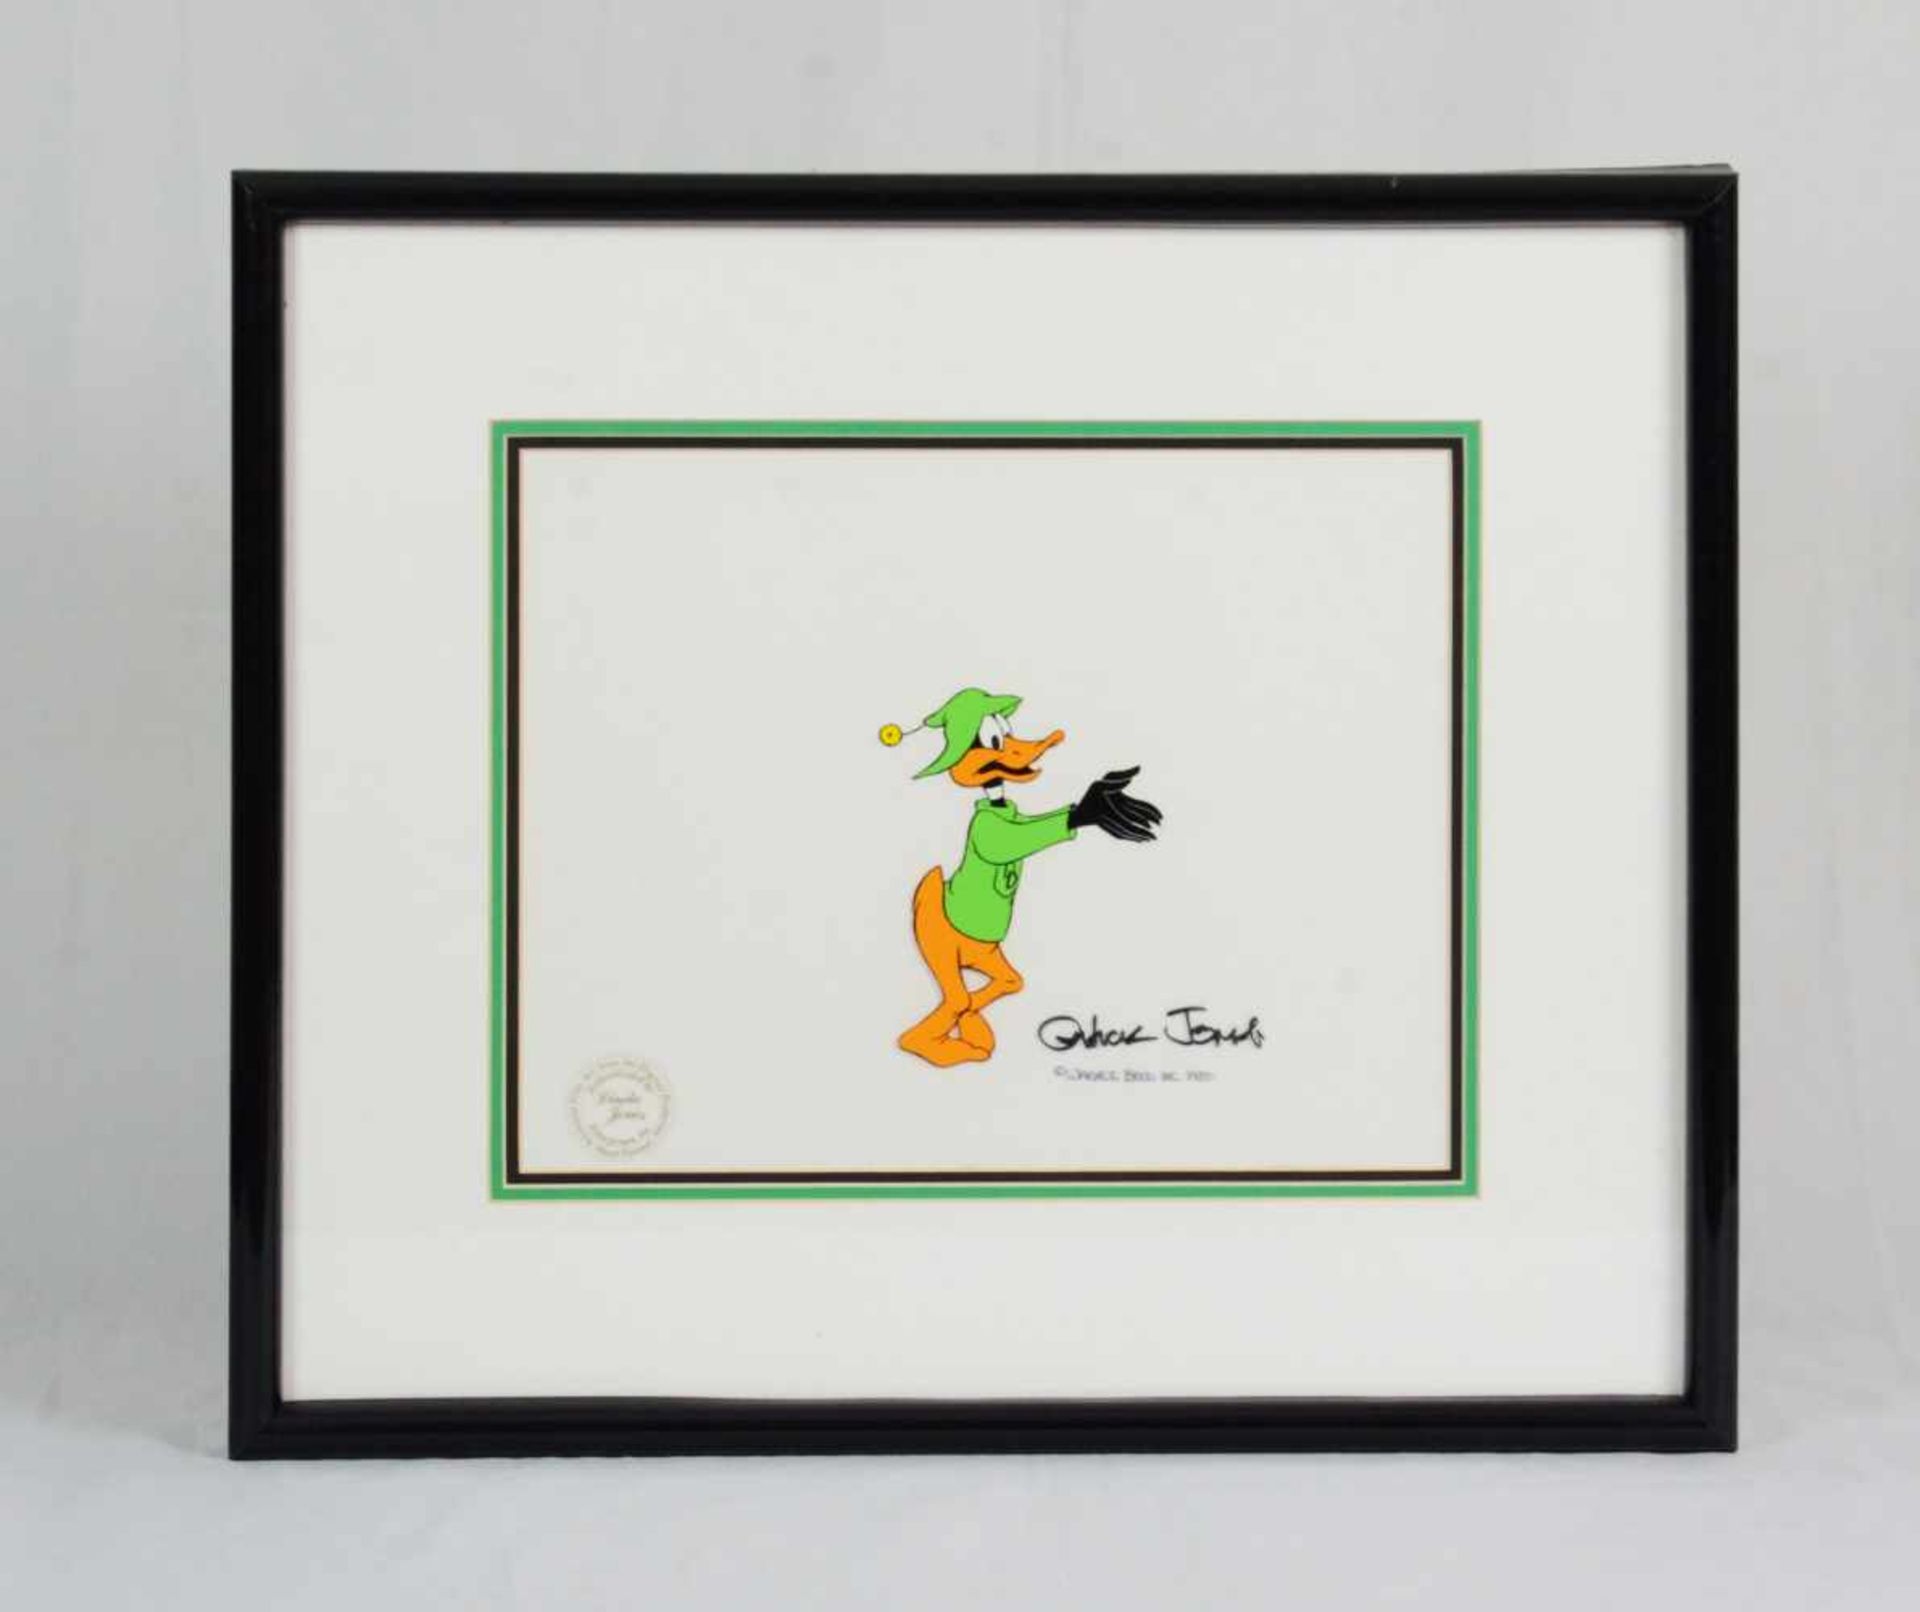 Original, signed Duffy Duck Celluloid paintingThis is an original, hand painted animated film art on